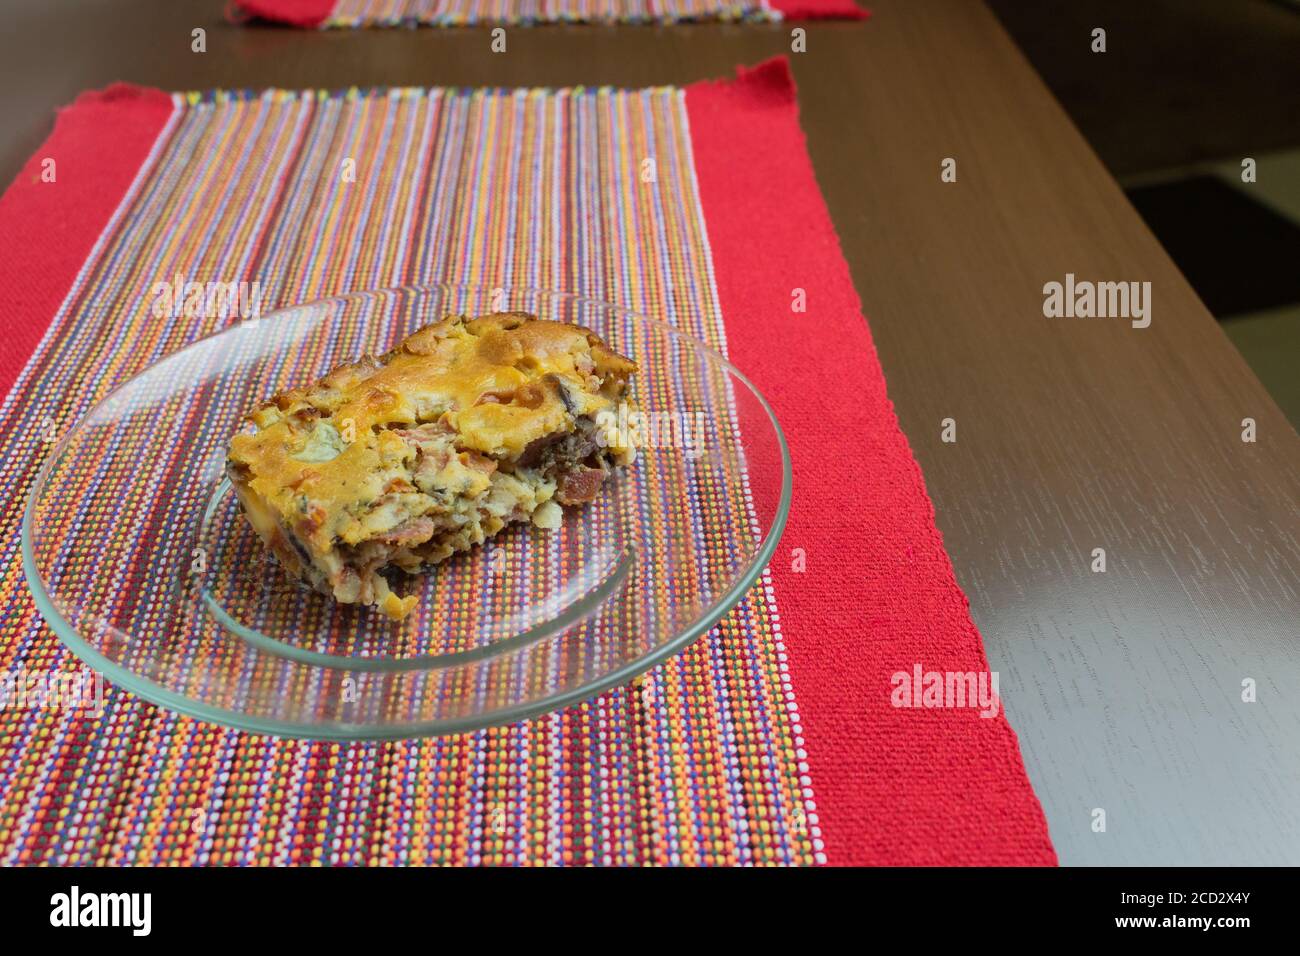 Pie with Cheese and Black Olive. Stock Photo